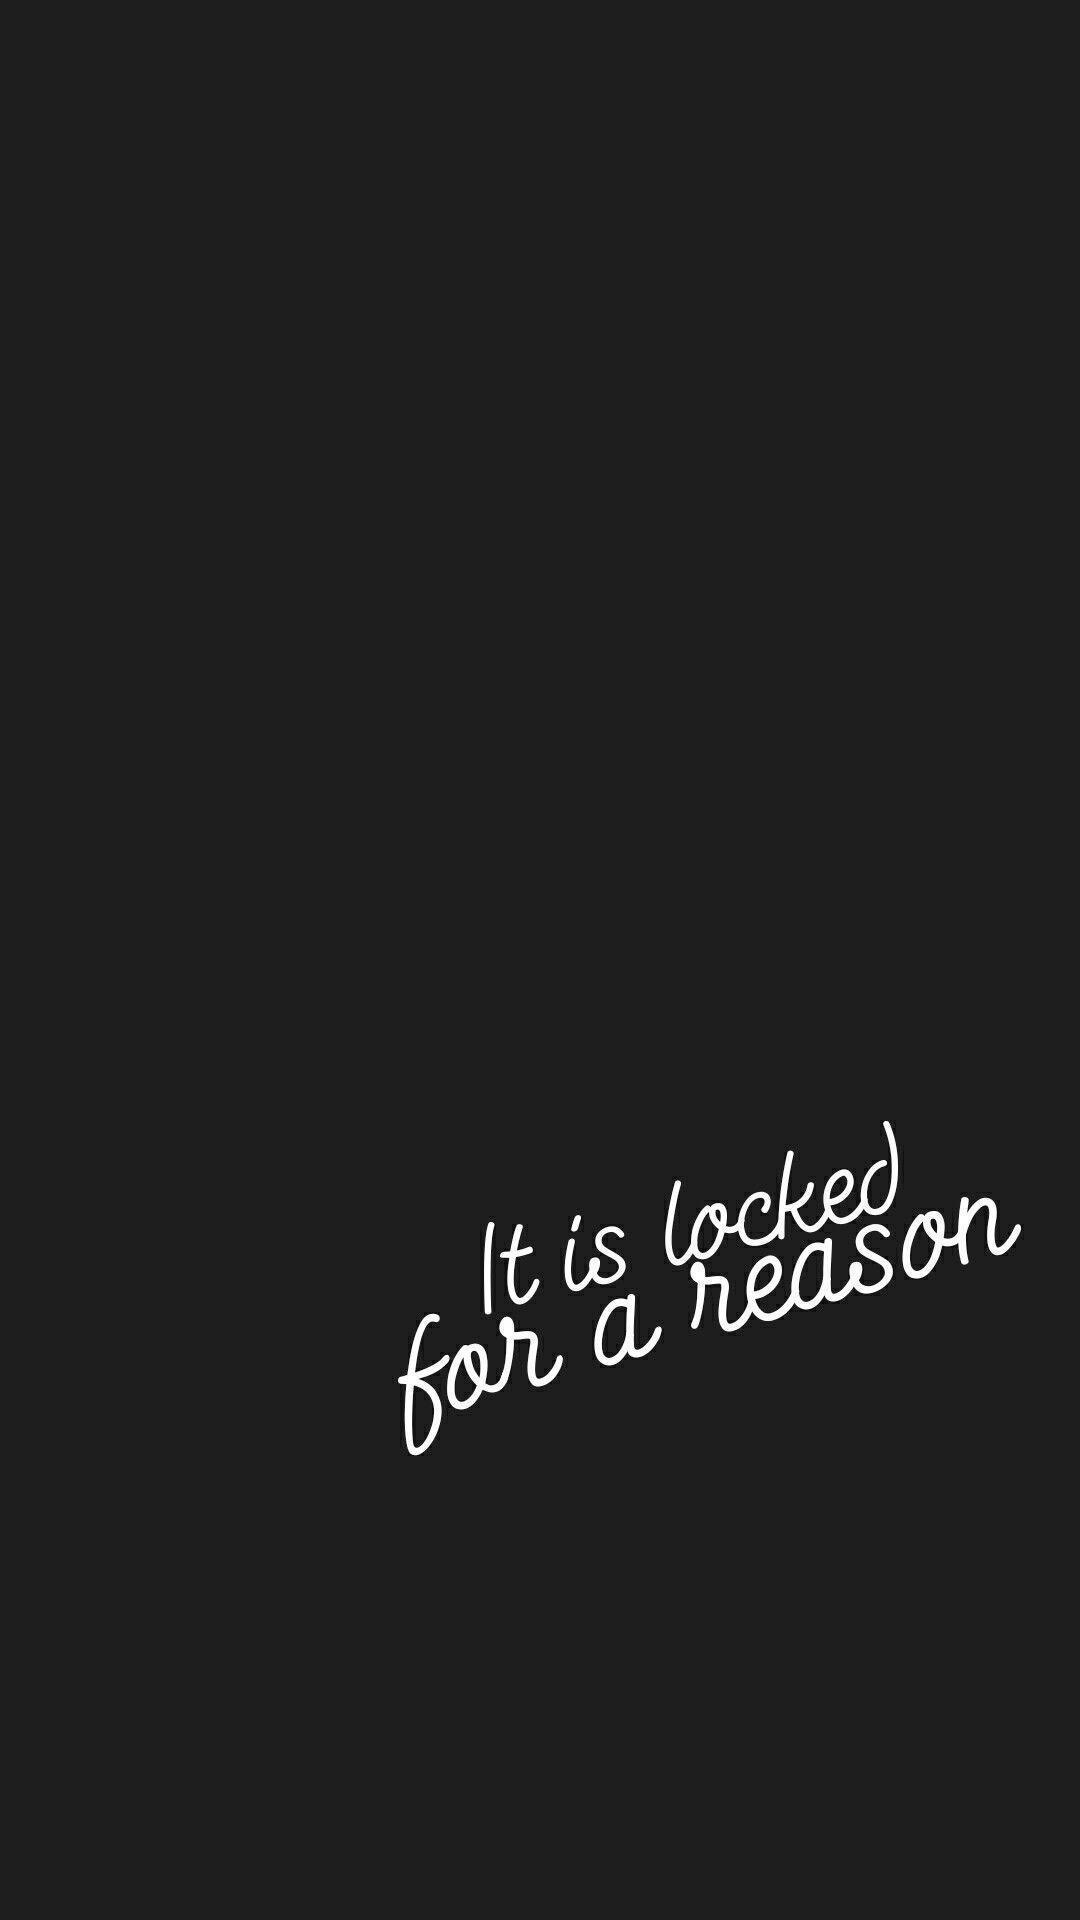 It's Locked for a Reason Wallpaper Free It's Locked for a Reason Background